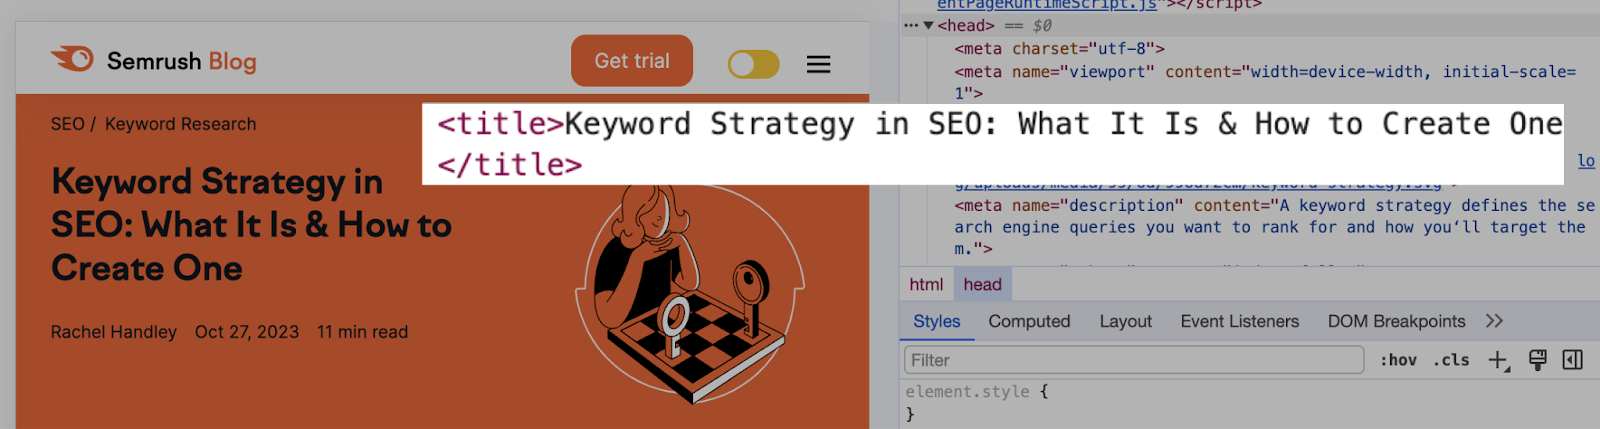 Example of a Semrush blog post showing the title tag "Keyword Strategy in SEO: What It Is & How to Create One" in the page's code.